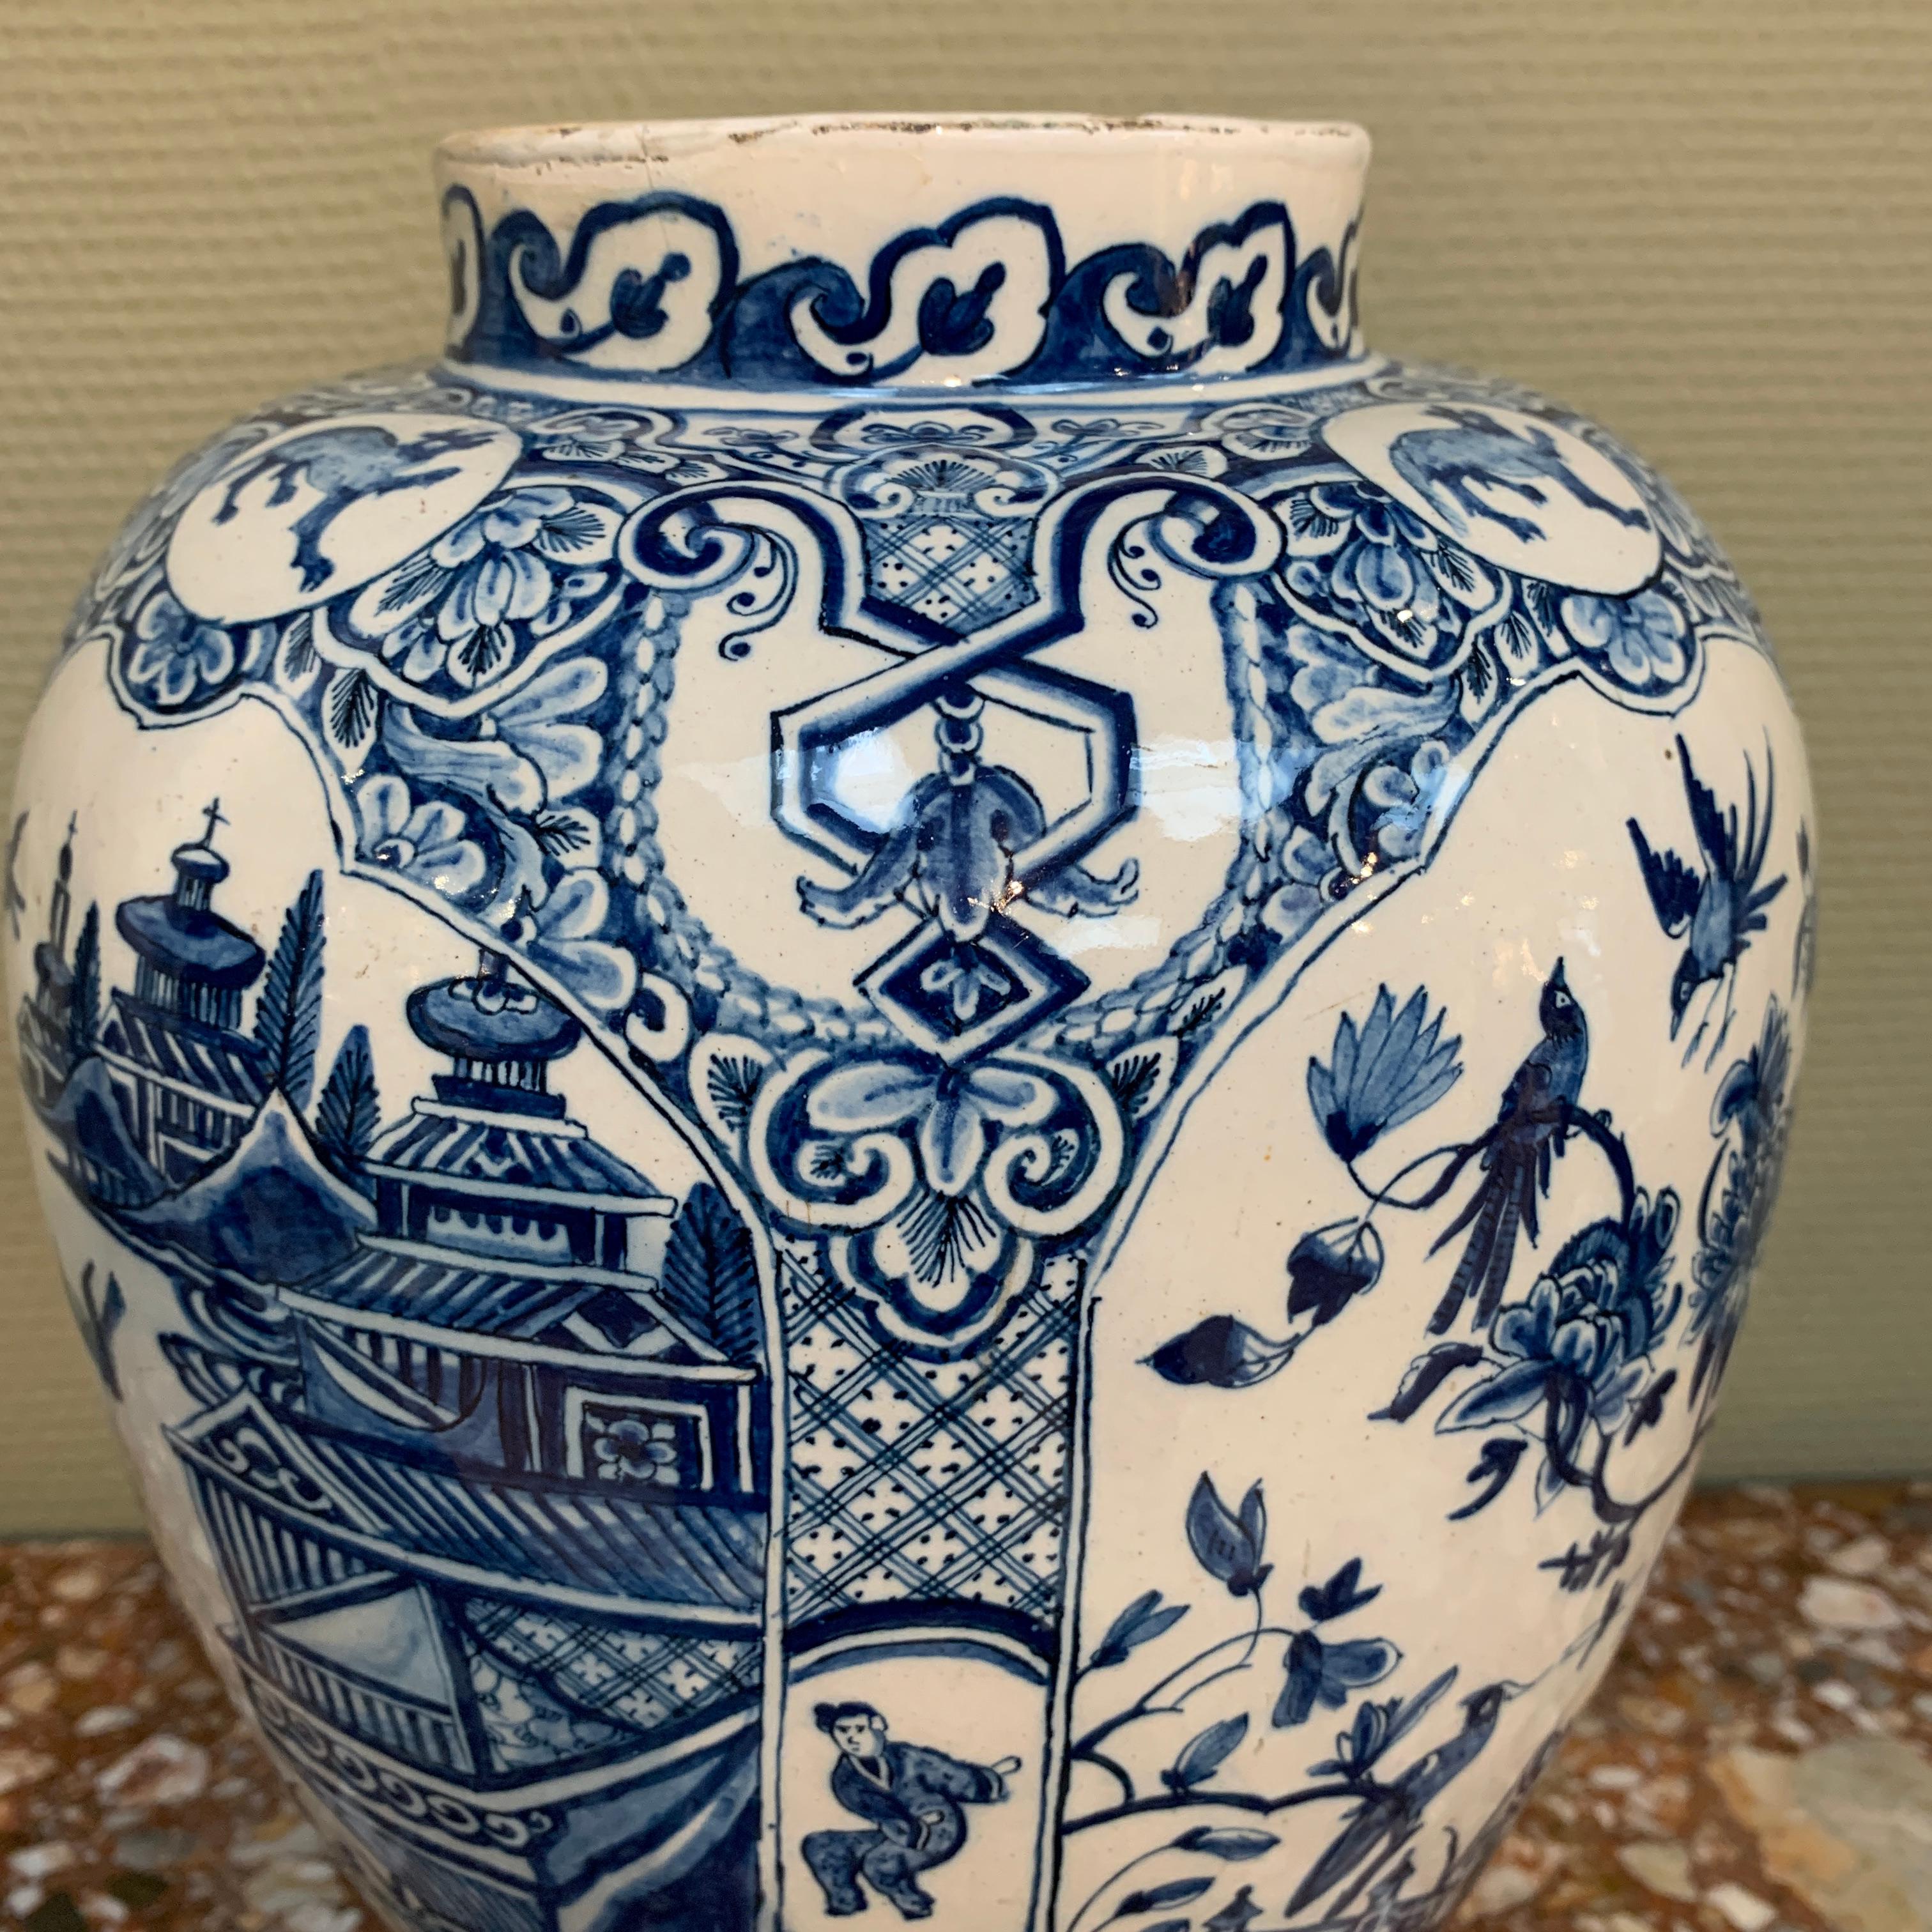 Ceramic Large Dutch Delft Blue and White Chinoiserie Vase, Early 18th Century